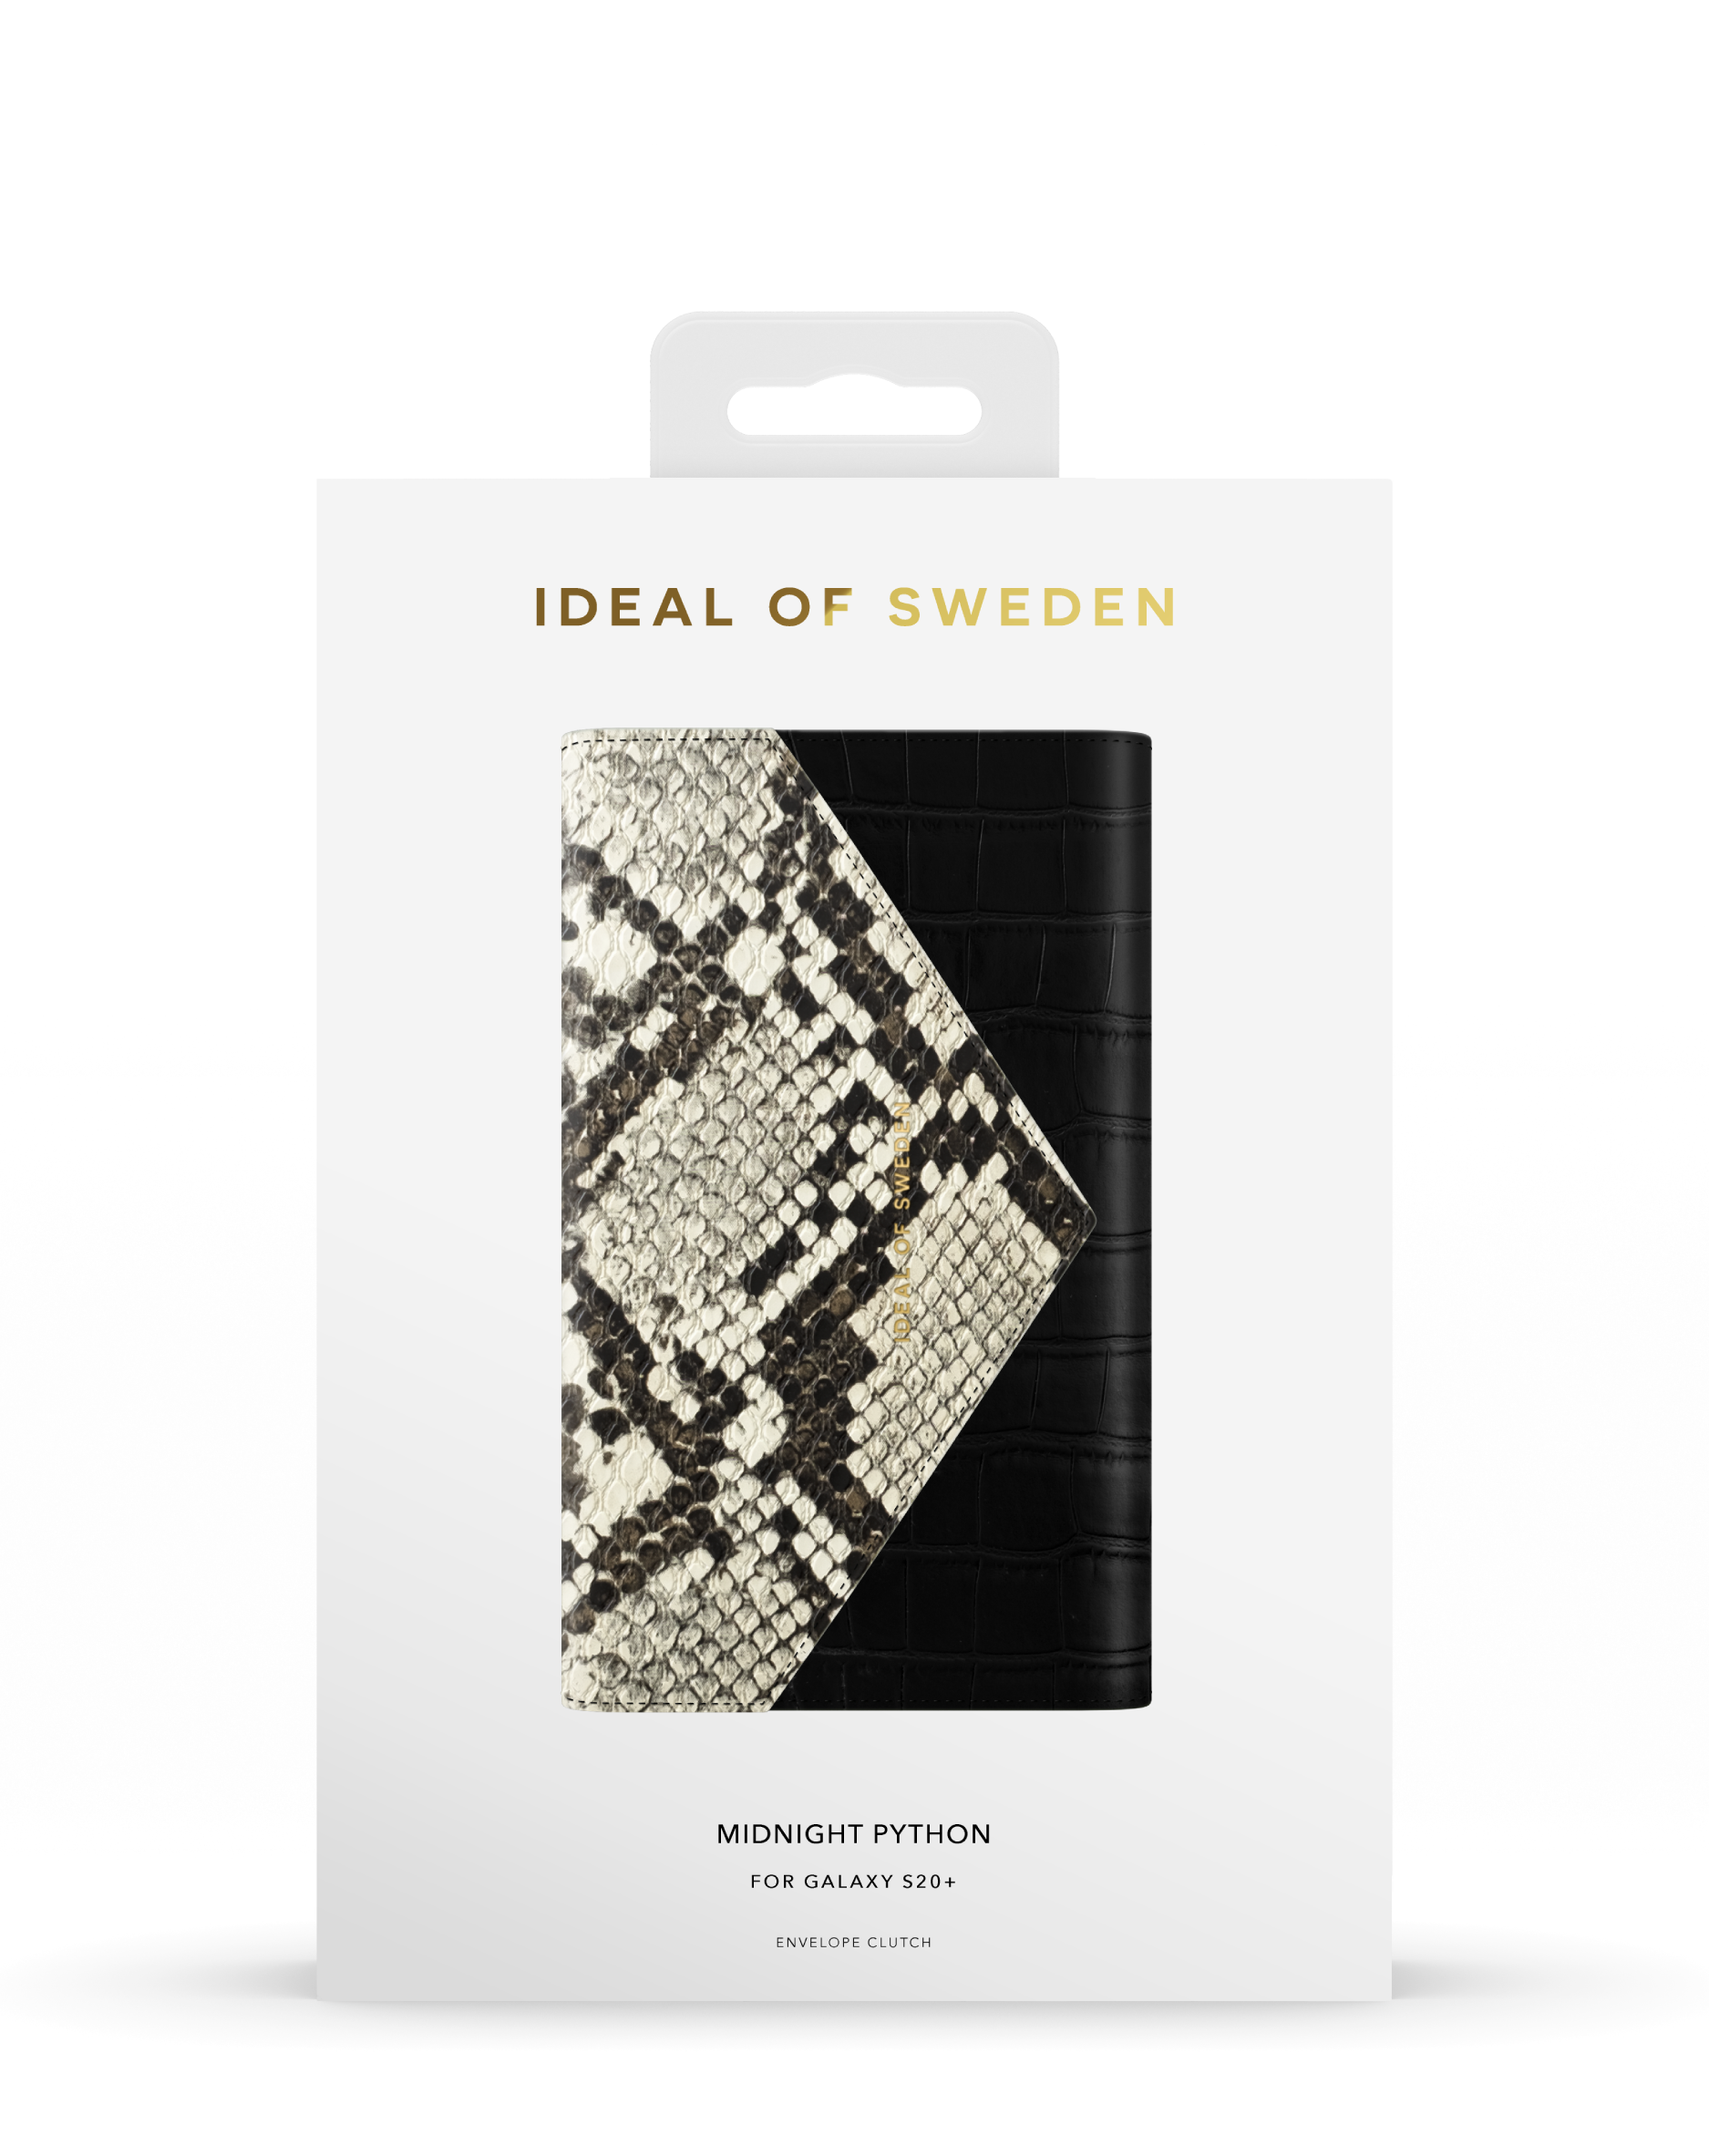 IDEAL OF Midnight Ultra, IDECSS20-S11P-199, Galaxy SWEDEN Full Python S20 Cover, Samsung